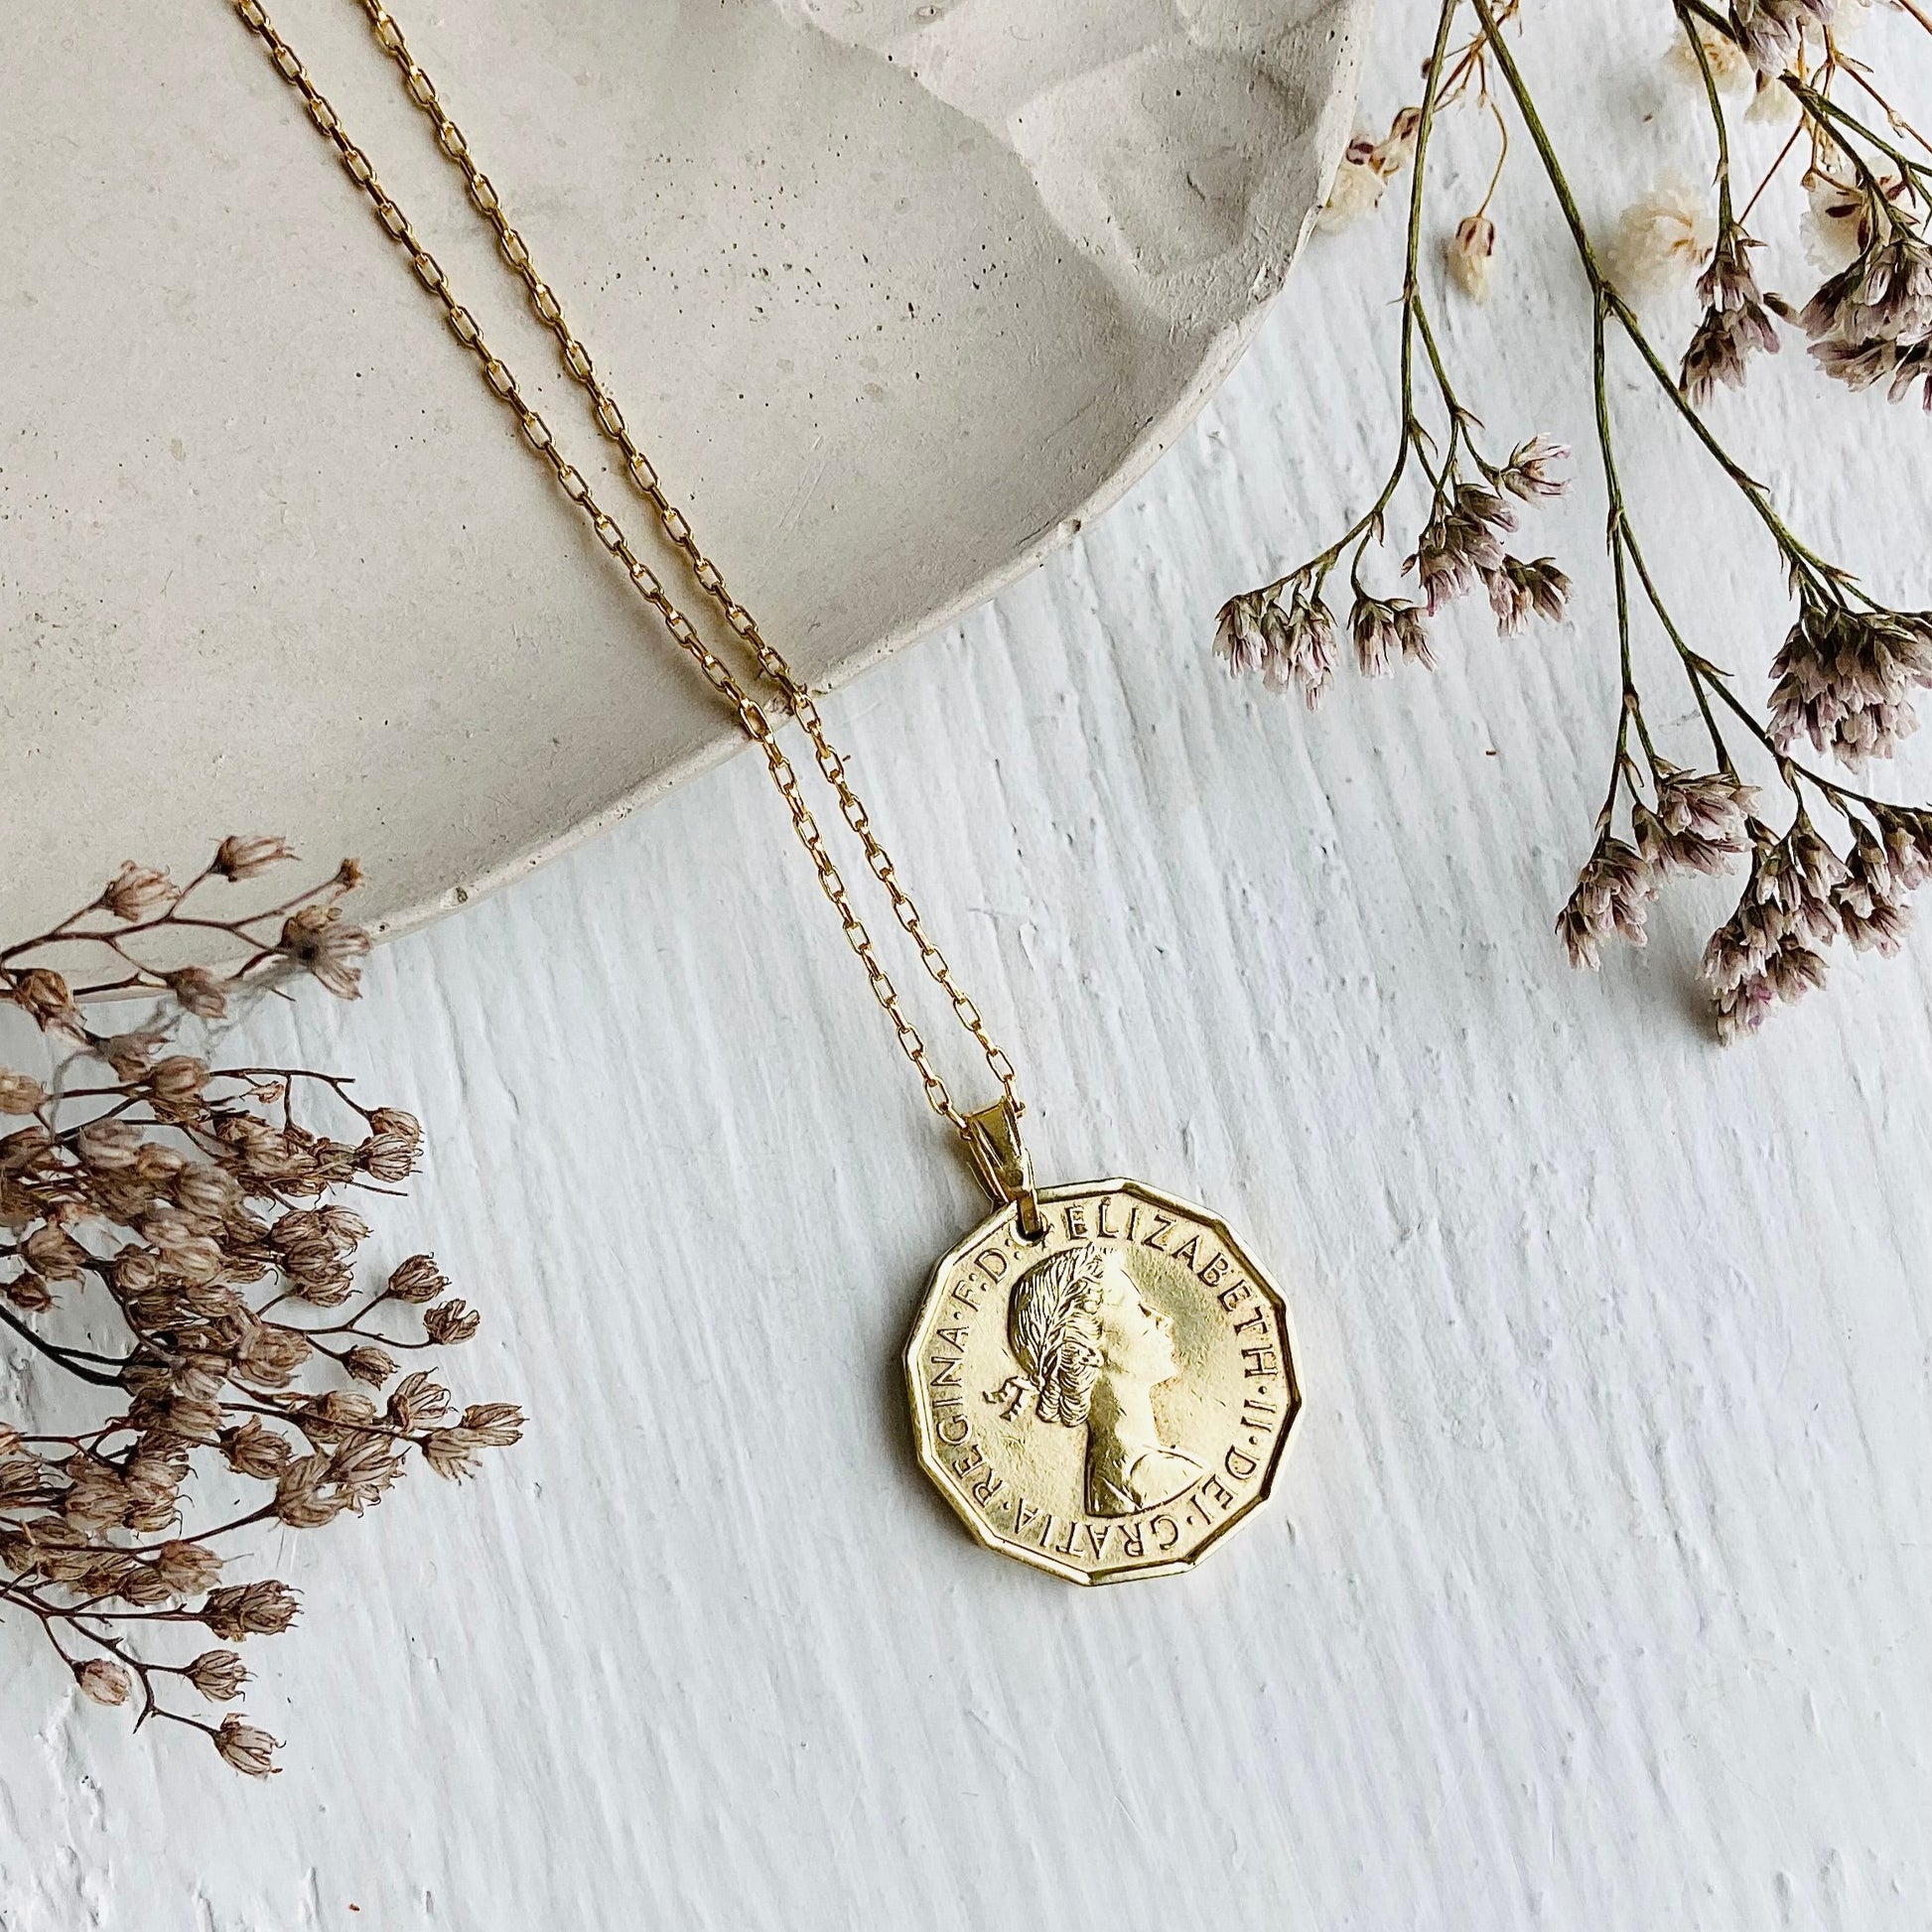 60th coin jewellery by Prenoa, 60th gifts for men and women, gold coin pendant, coin gifts UK